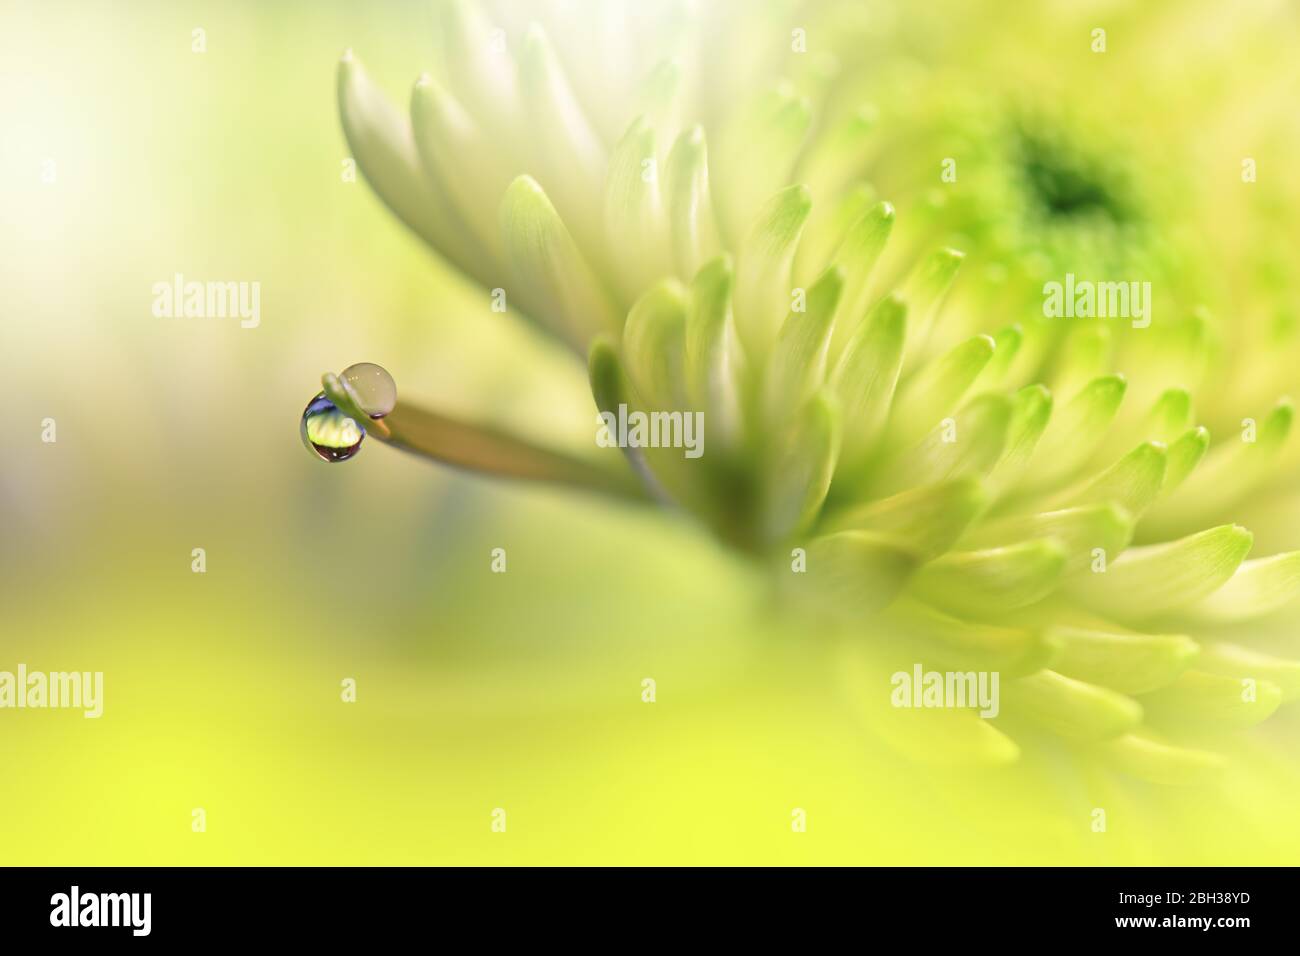 Beautiful Nature Background.Floral Art Design.Abstract Macro Photography.Chrysanthemum Daisy Flower.Golden Background.Creative Artistic Wallpaper.Spa. Stock Photo